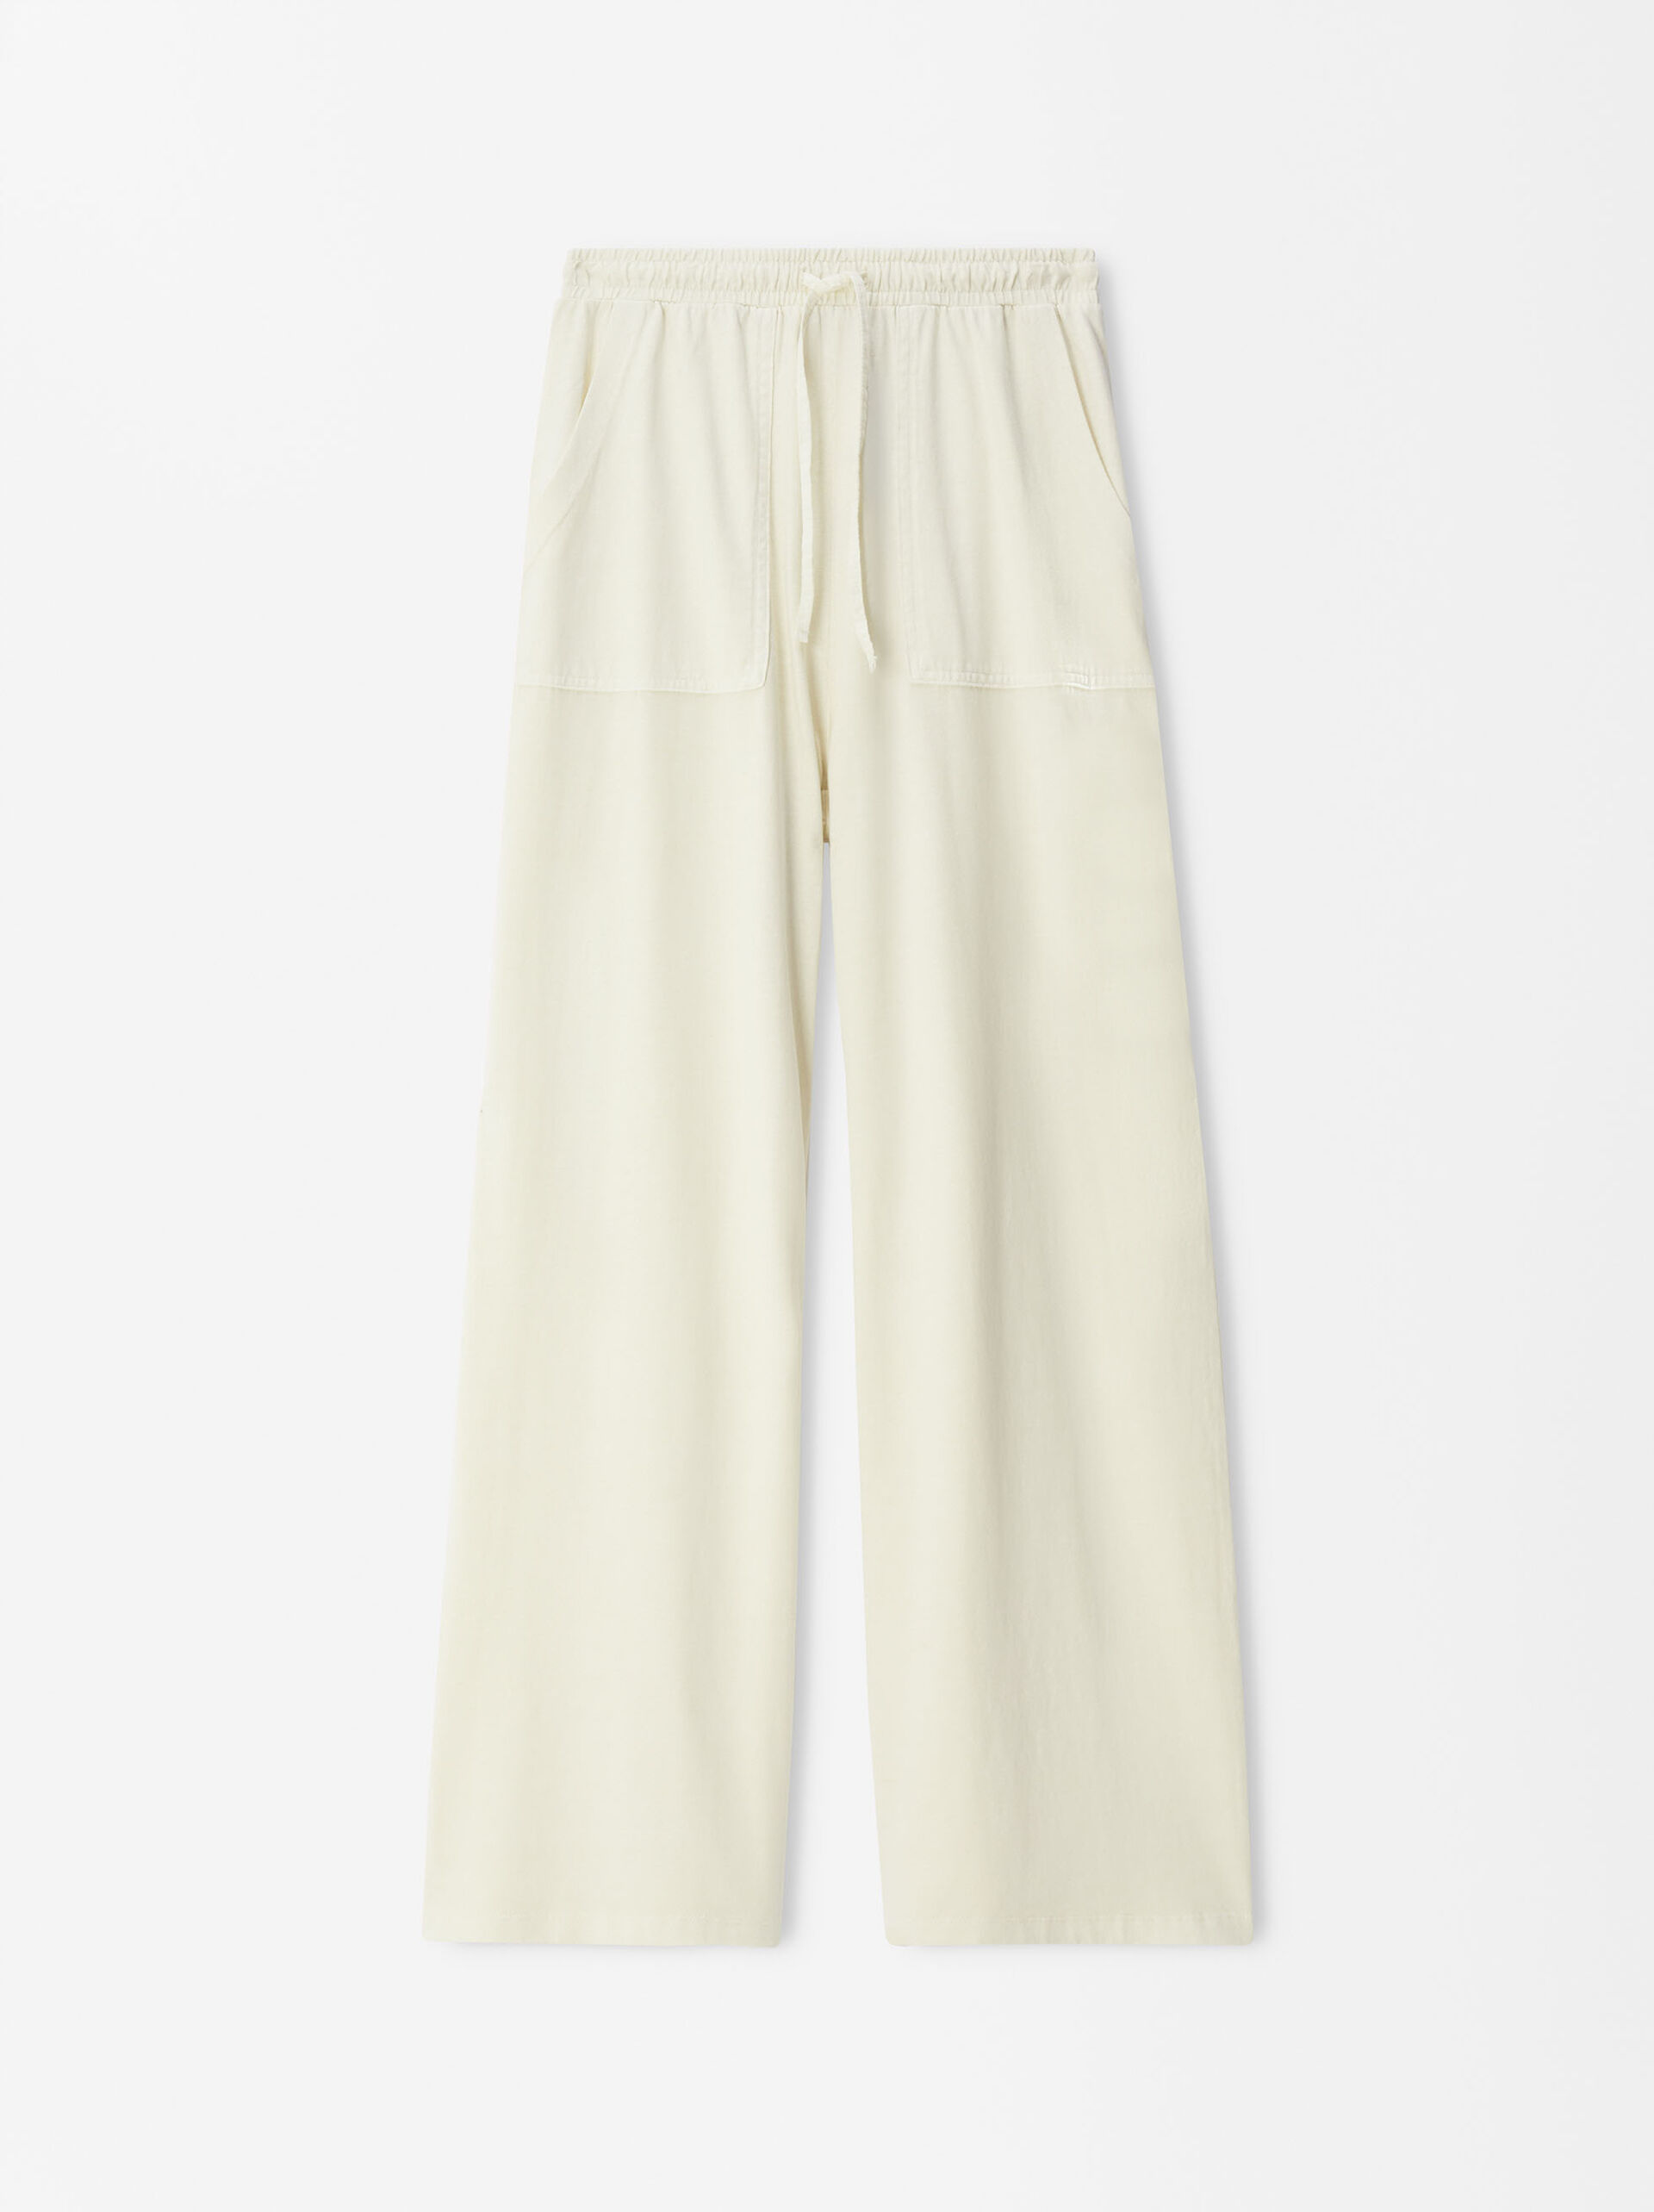 Cotton Trousers With Pockets image number 5.0